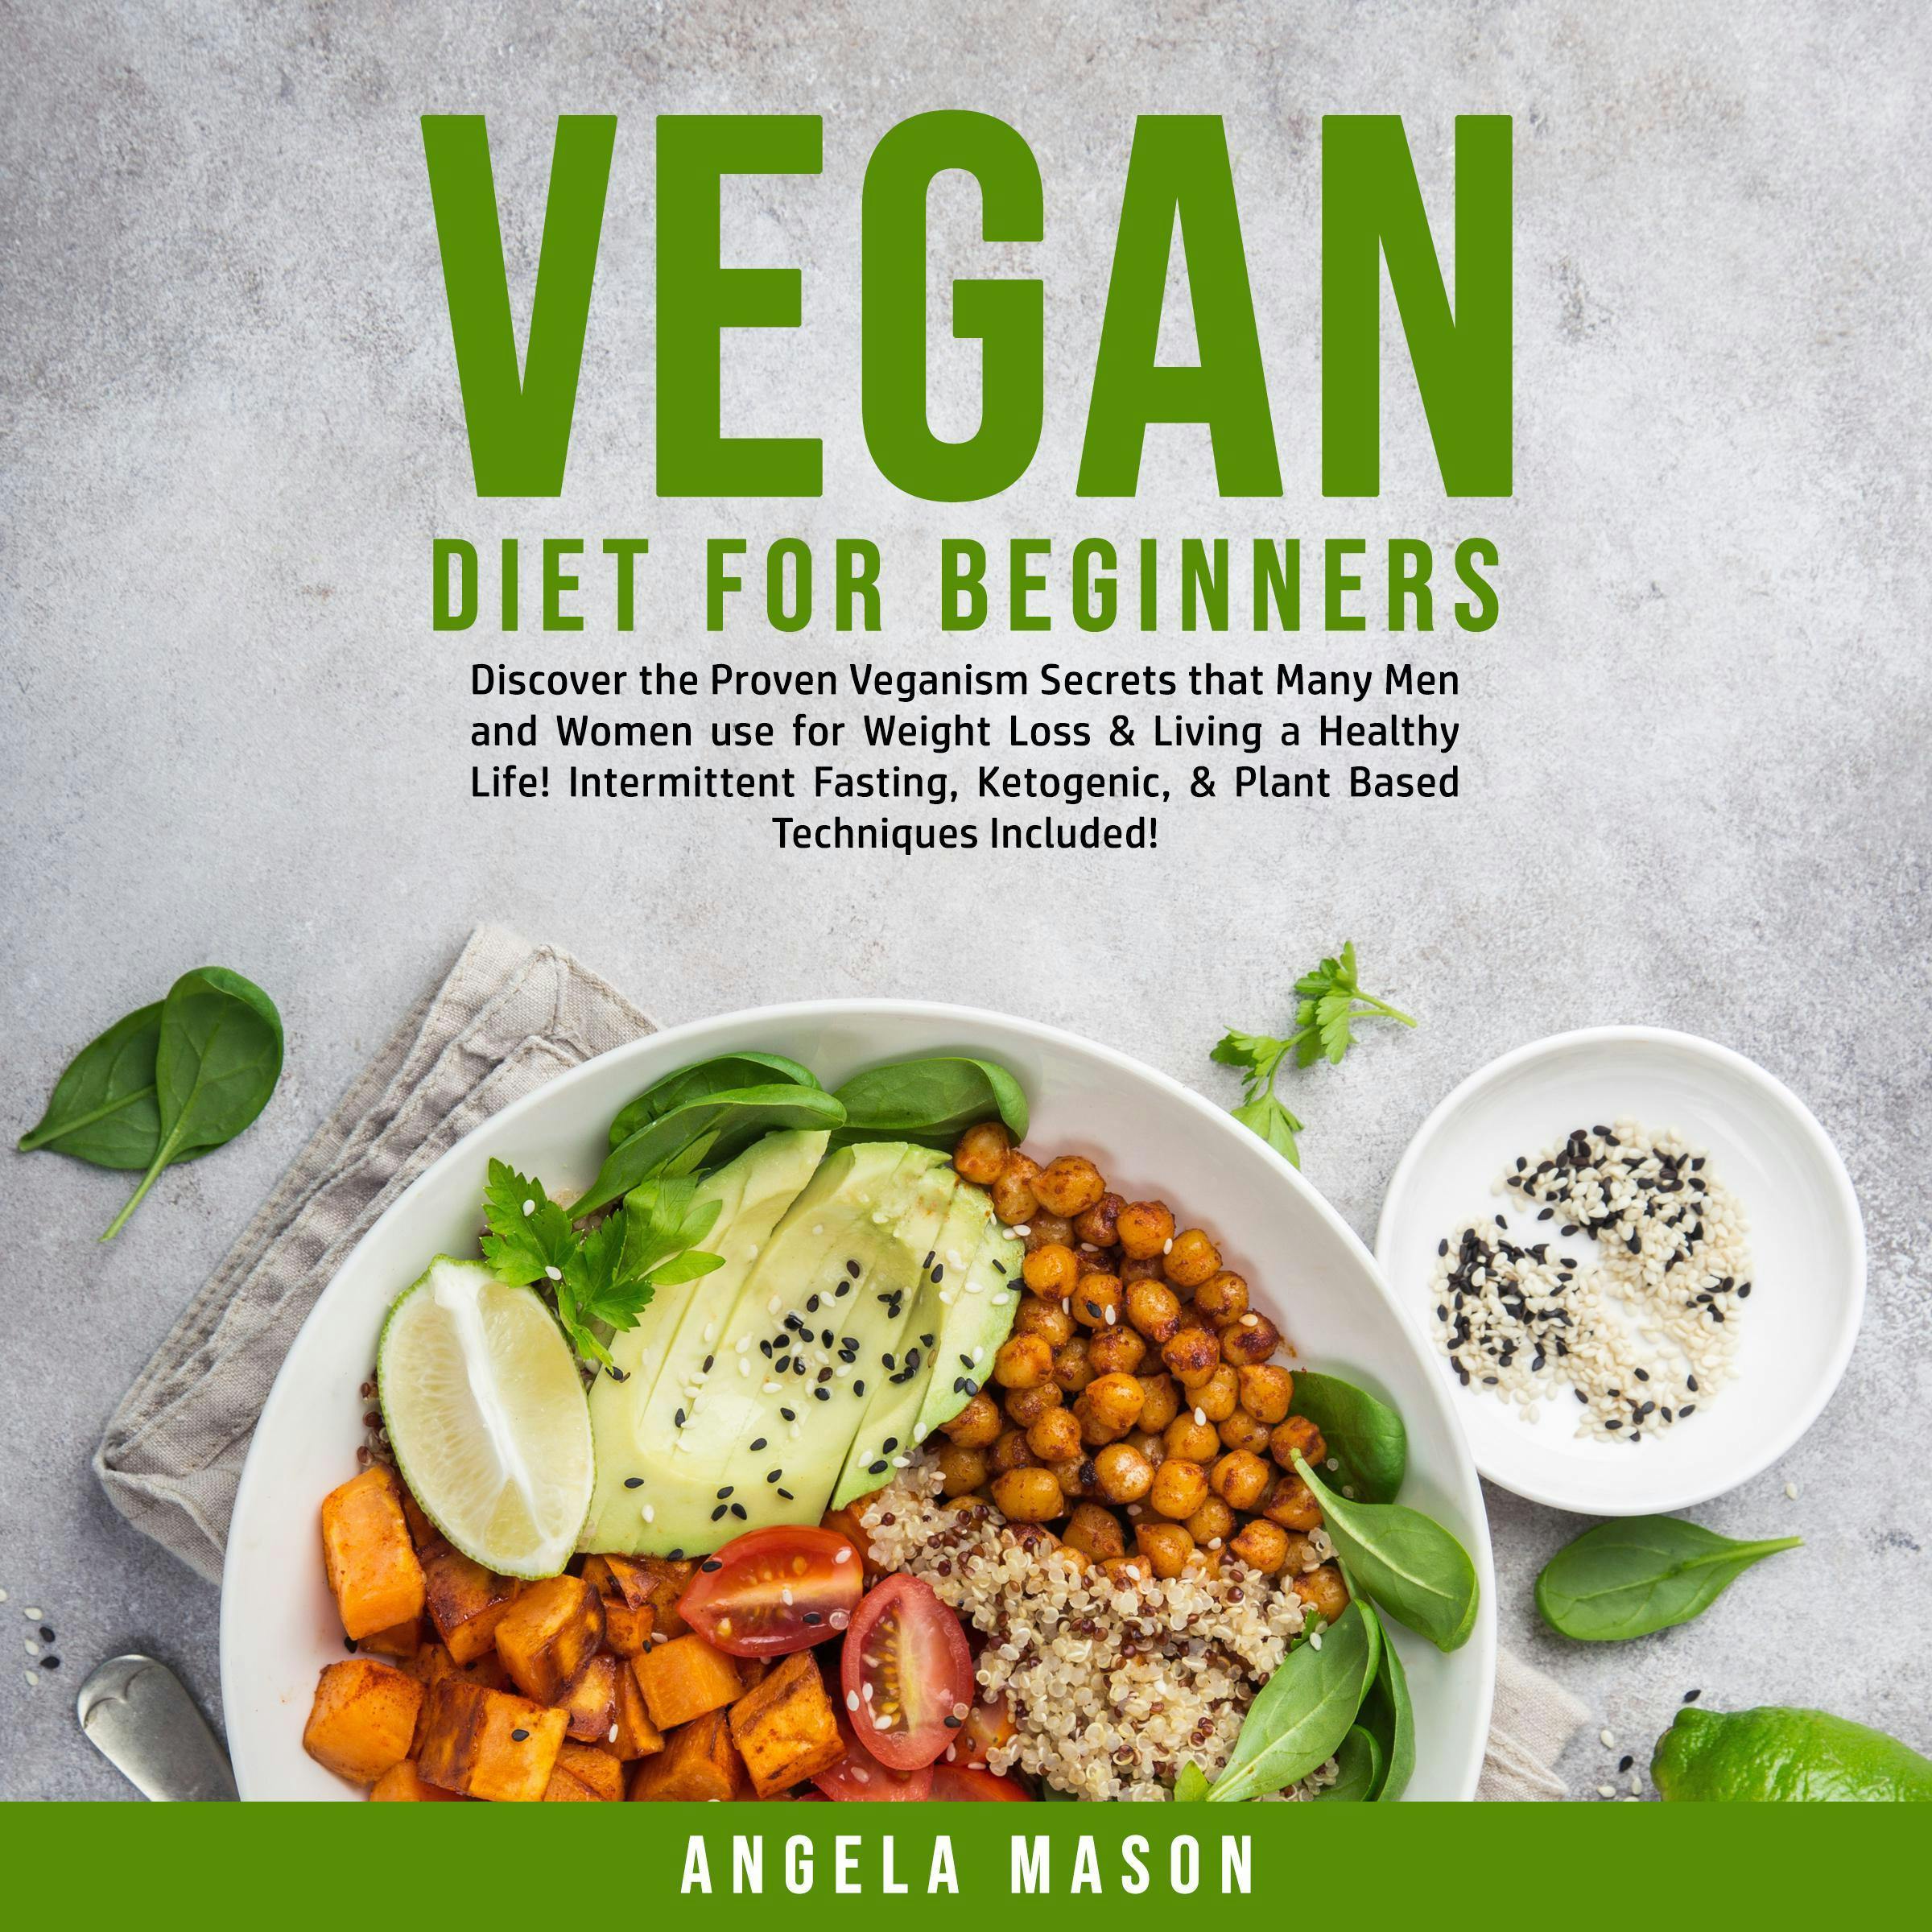 The Vegan Diet and Weight Loss